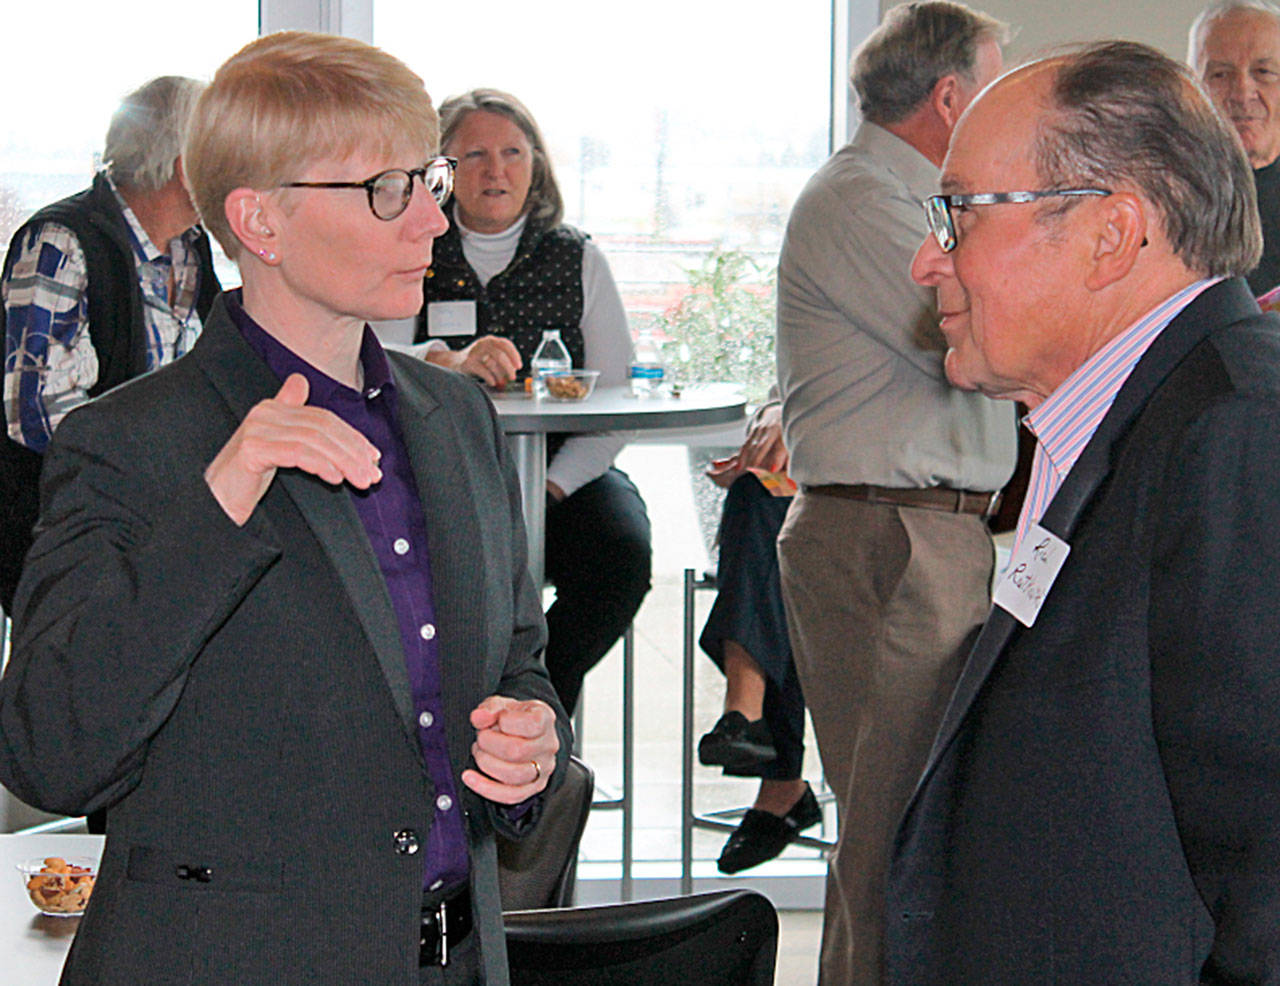 Green River College President Suzanne Johnson, left, chats with Rich Rutkowski, past college president, at the recent social. COURTESY PHOTO